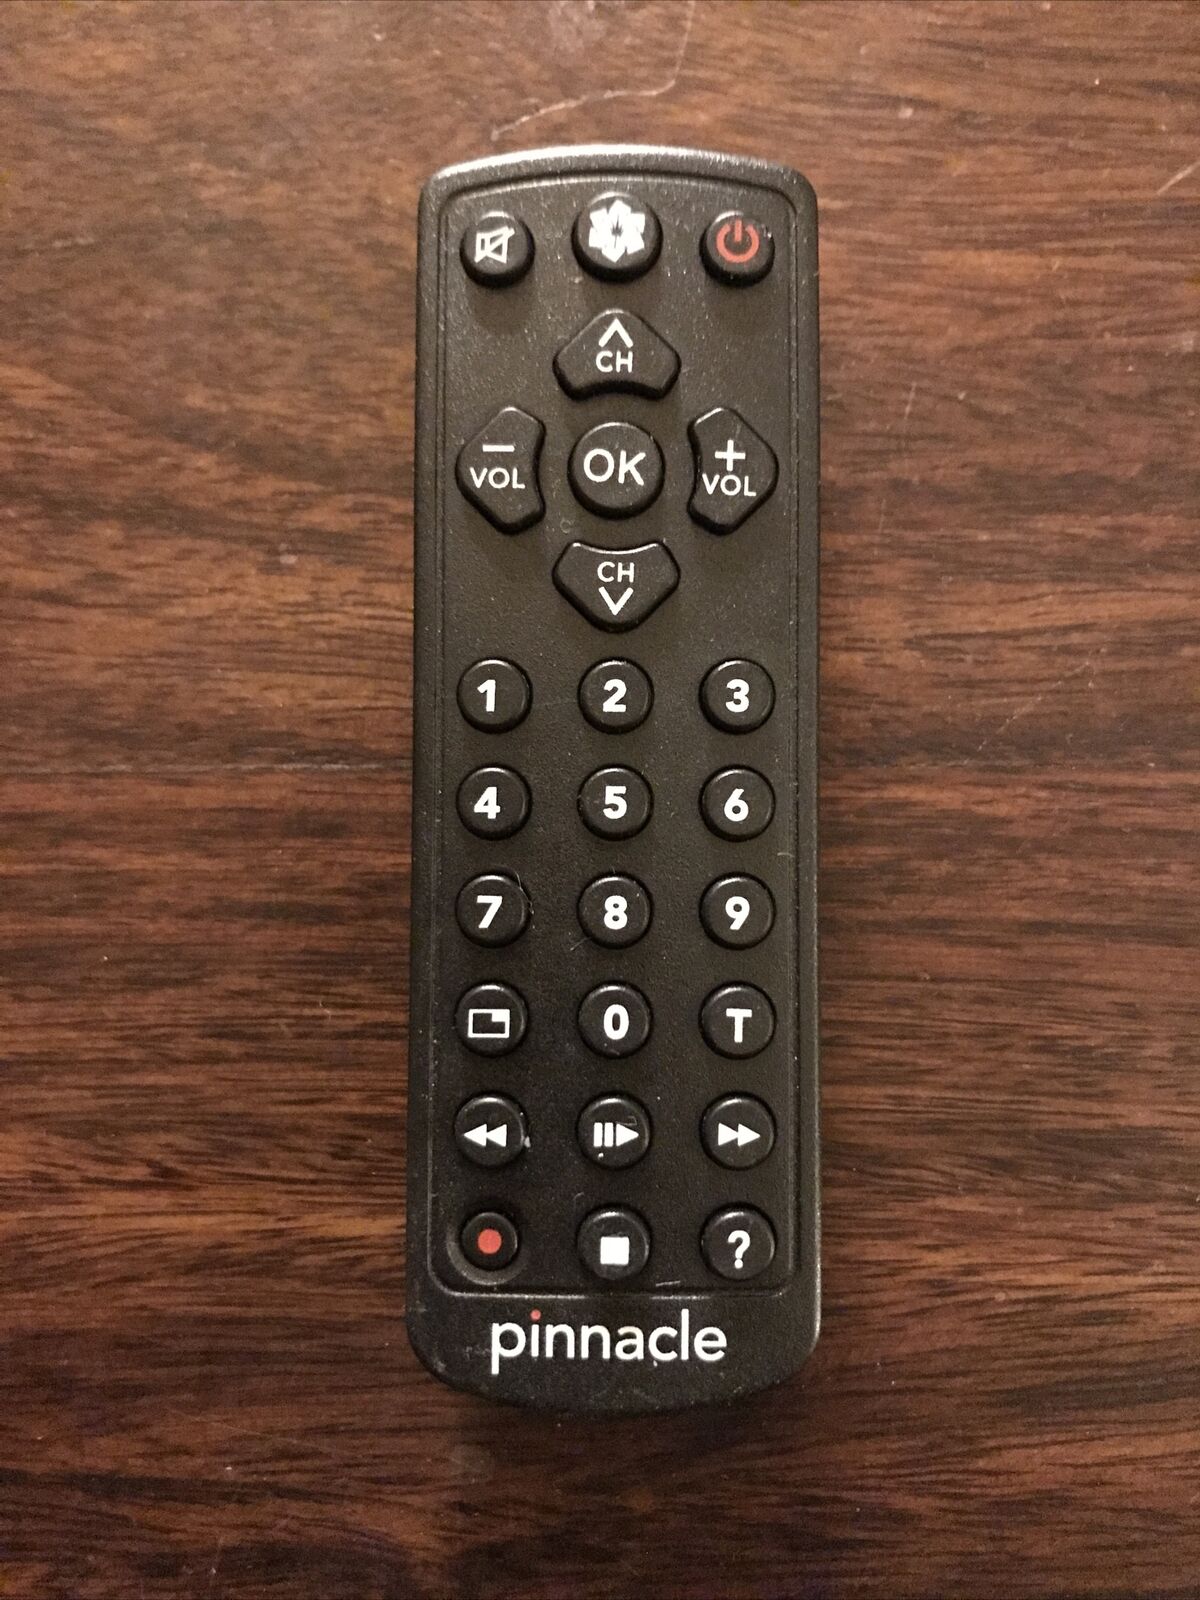 Pinnacle PCTV Stick USB TV Tuner Replacement Remote Control